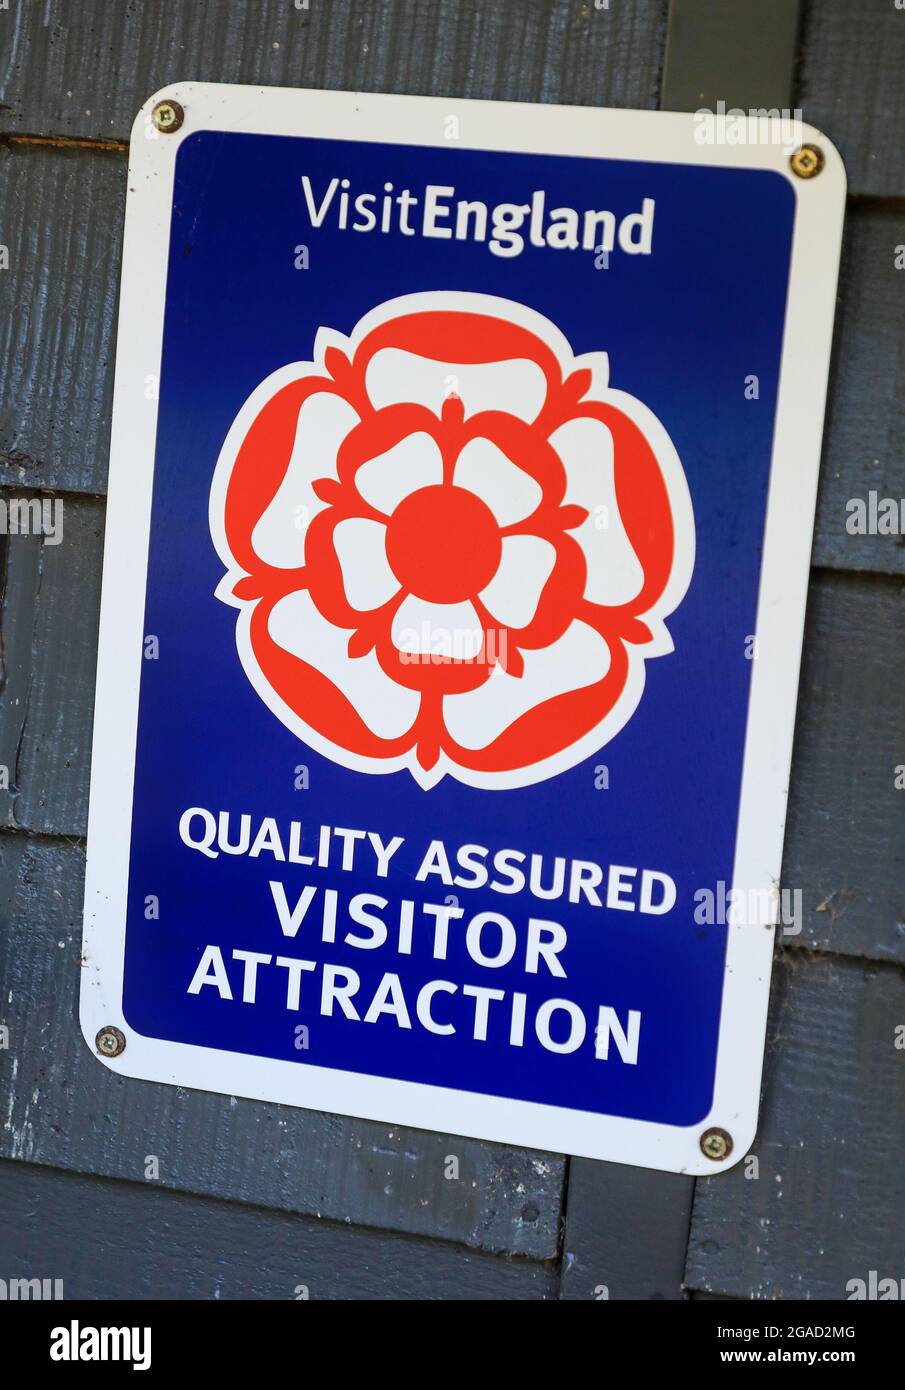 Panneau « Visit England », « Quality Assured Visitor attraction », Angleterre, Royaume-Uni Banque D'Images